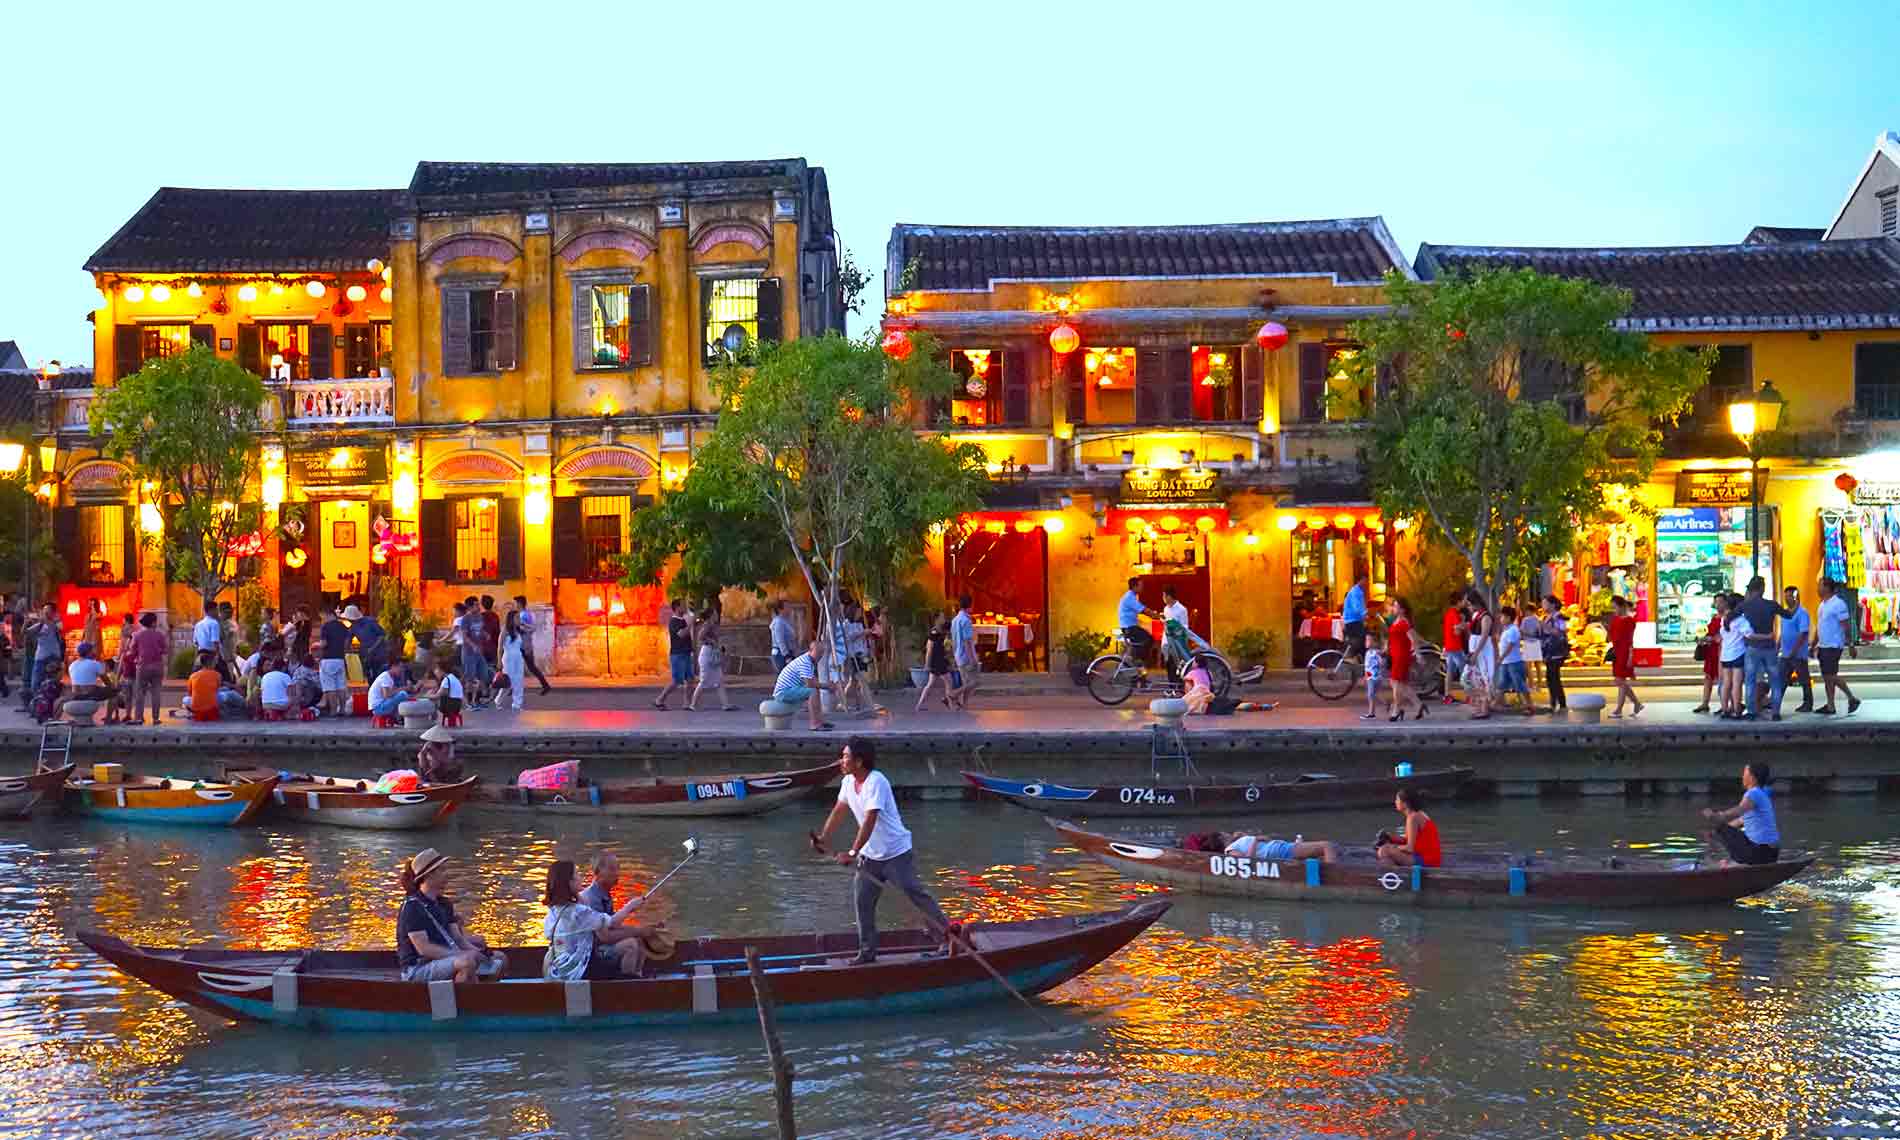 Enjoyable Tour Package of North Vietnam 4 Days & 3 Nights